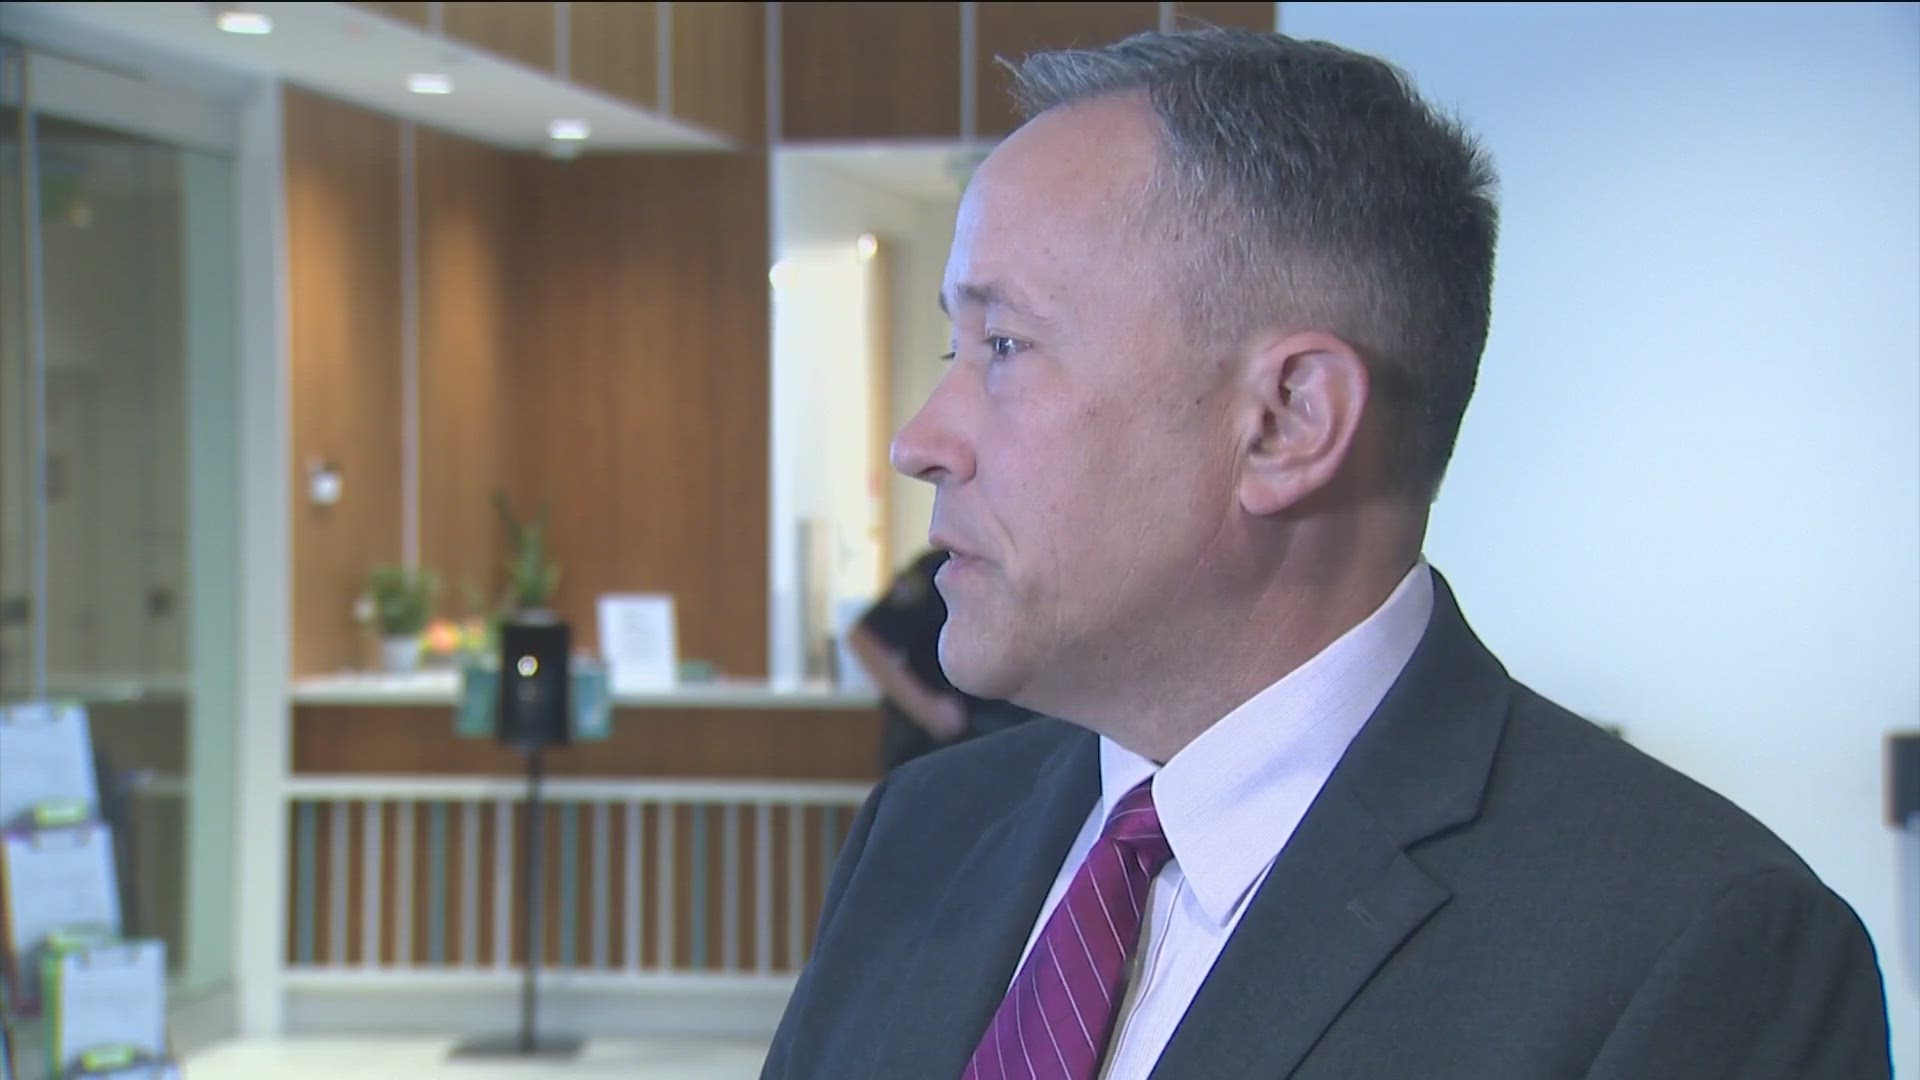 Austin ISD has not had a permanent superintendent in nearly a year. Matias Segura has served as the interim superintendent since December.